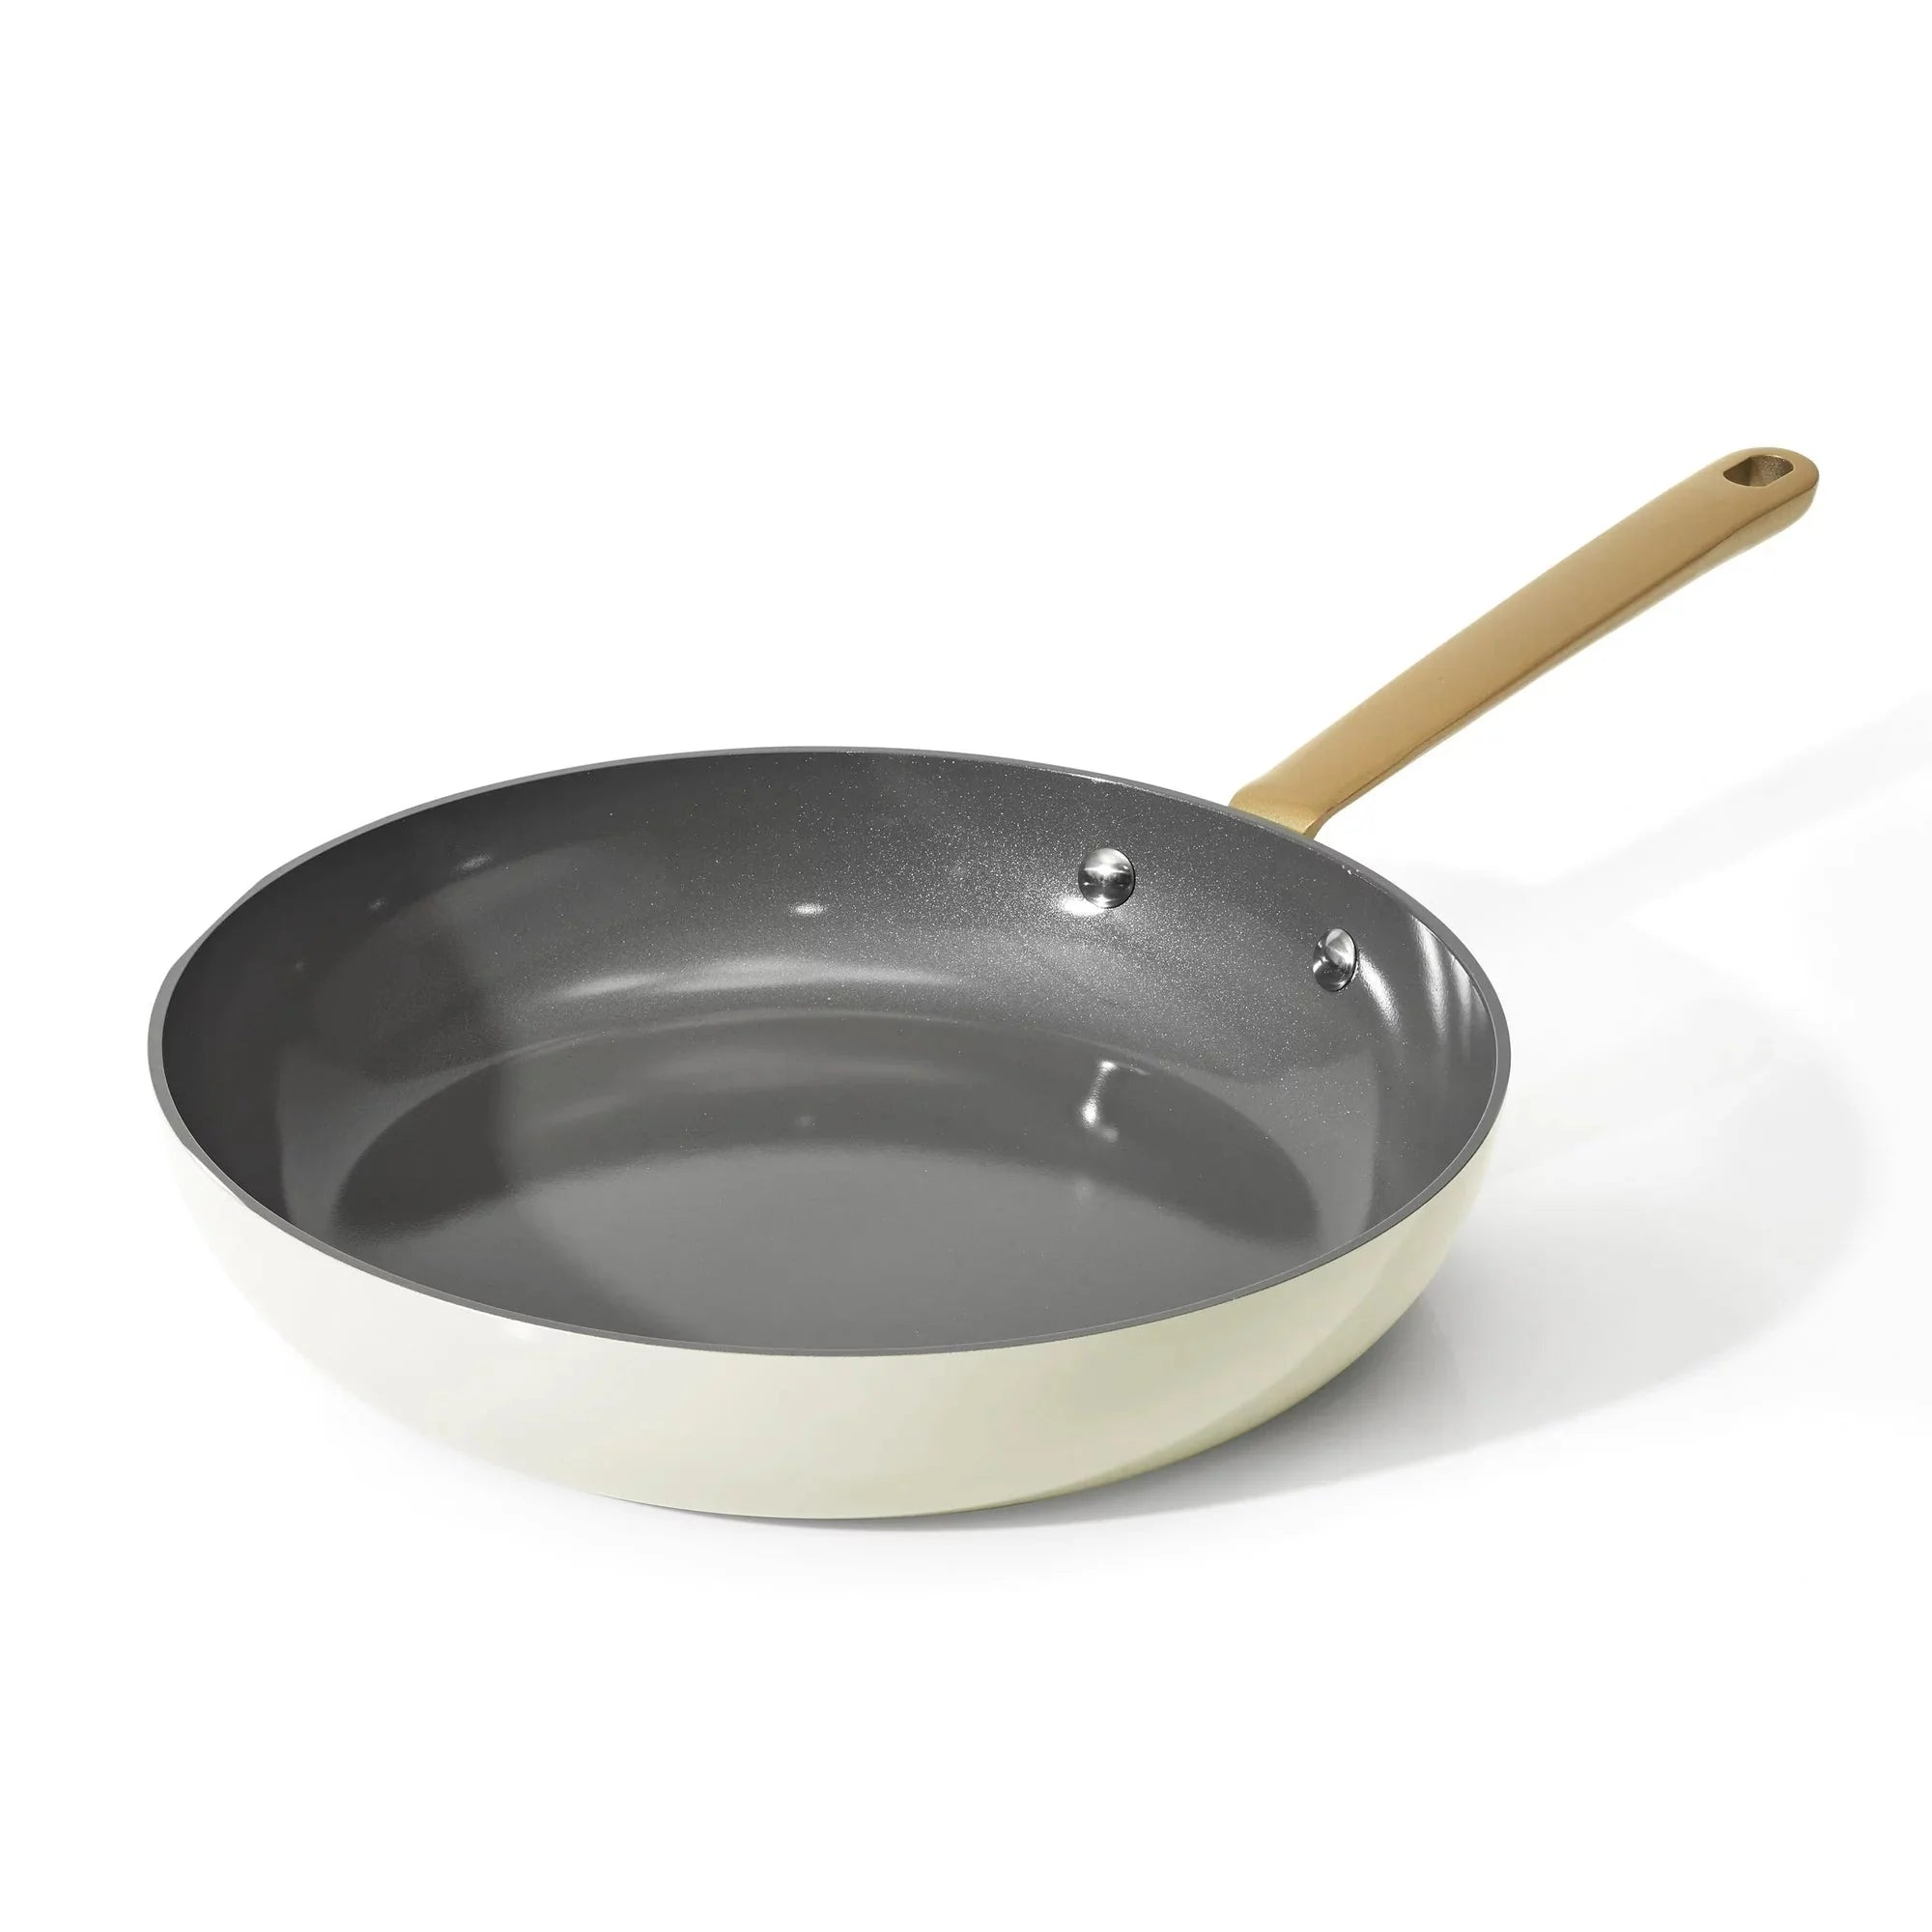 Wholesale prices with free shipping all over United States Beautiful 12 inch Ceramic Non-Stick Fry Pan, White Icing by Drew Barrymore - Steven Deals